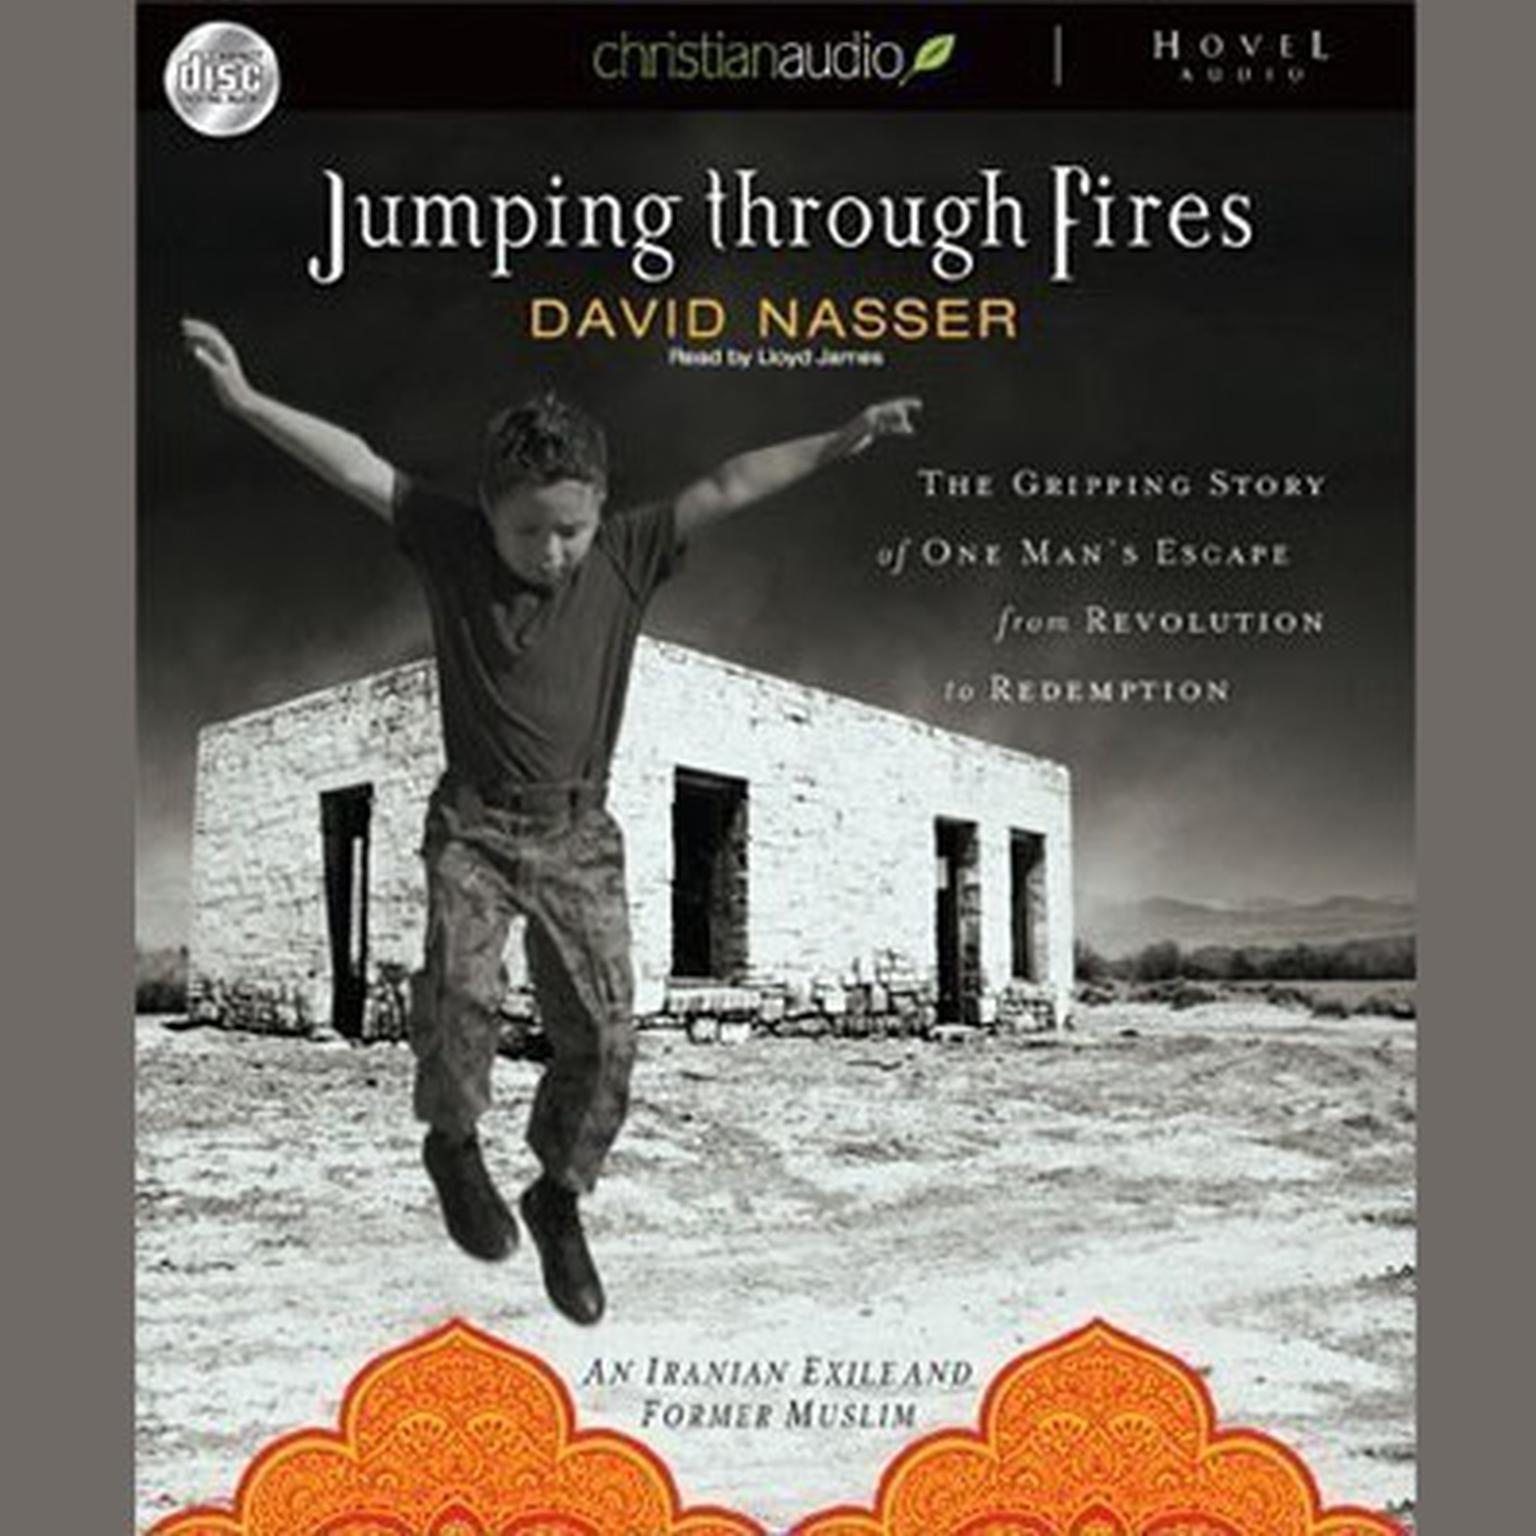 Jumping through Fires: The gripping story of one mans escape from revolution to redemption Audiobook, by David Nasser